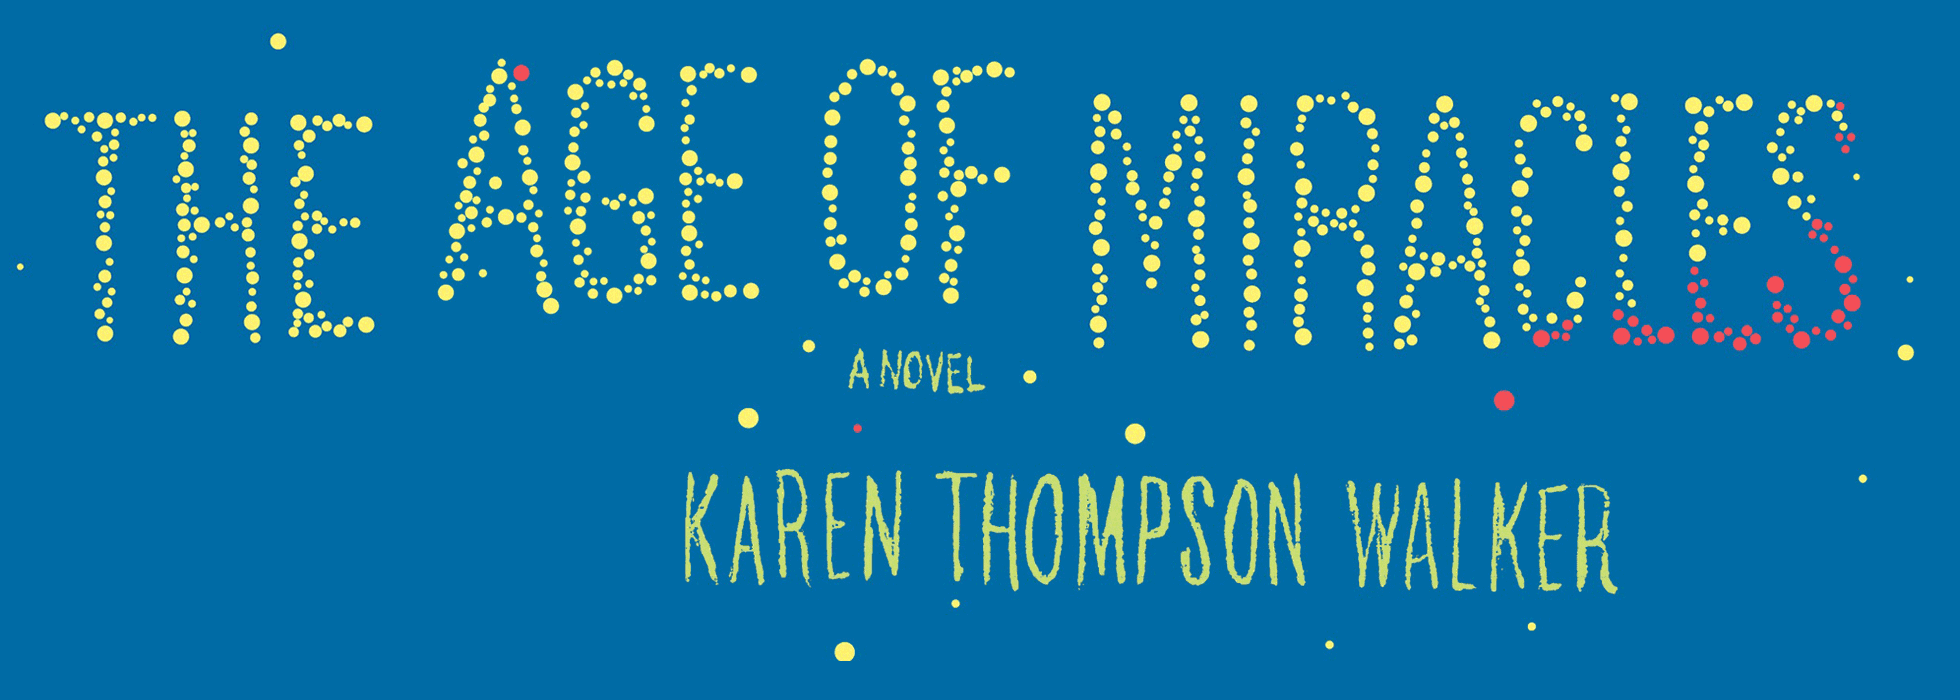 Age of Miracles by Karen Thompson Walker